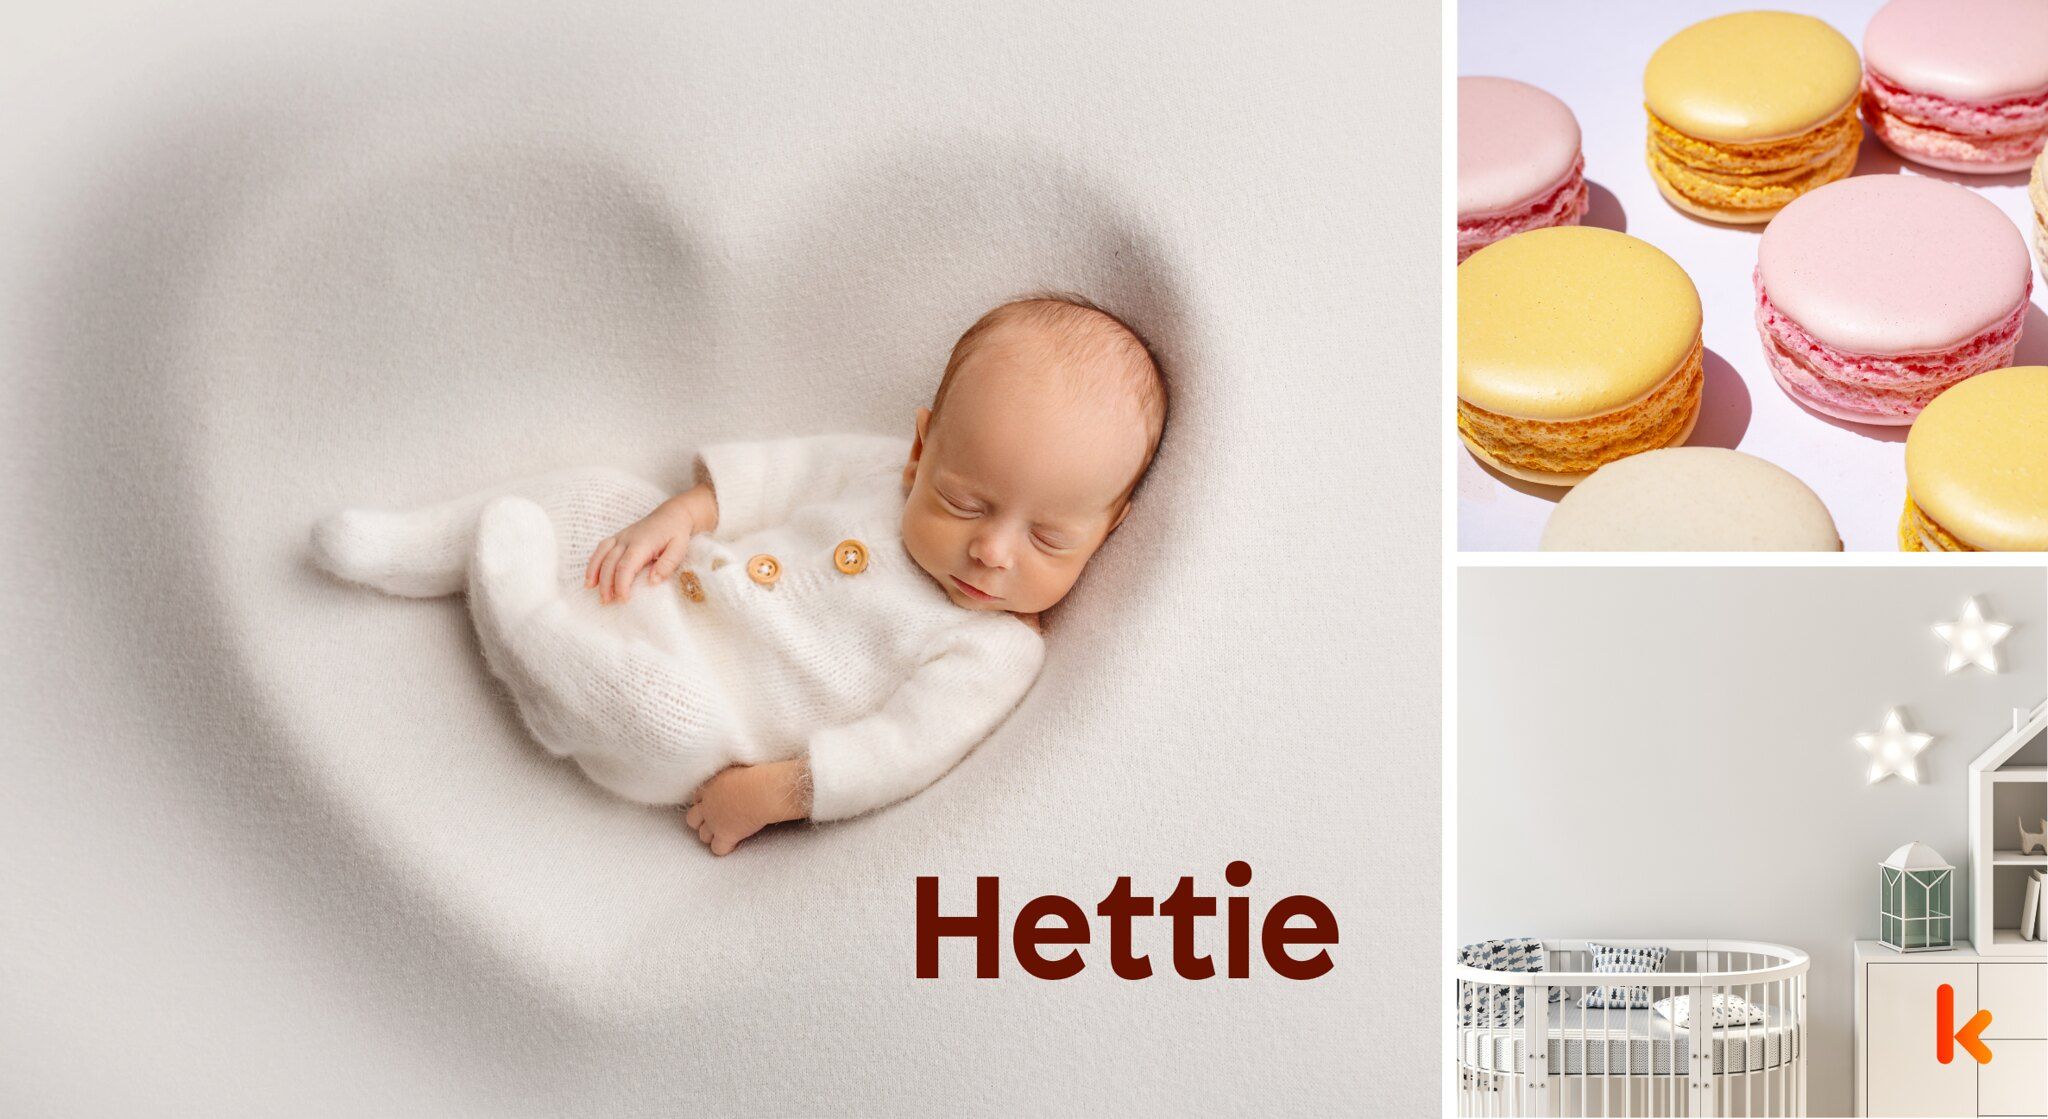 Meaning of the name Hettie